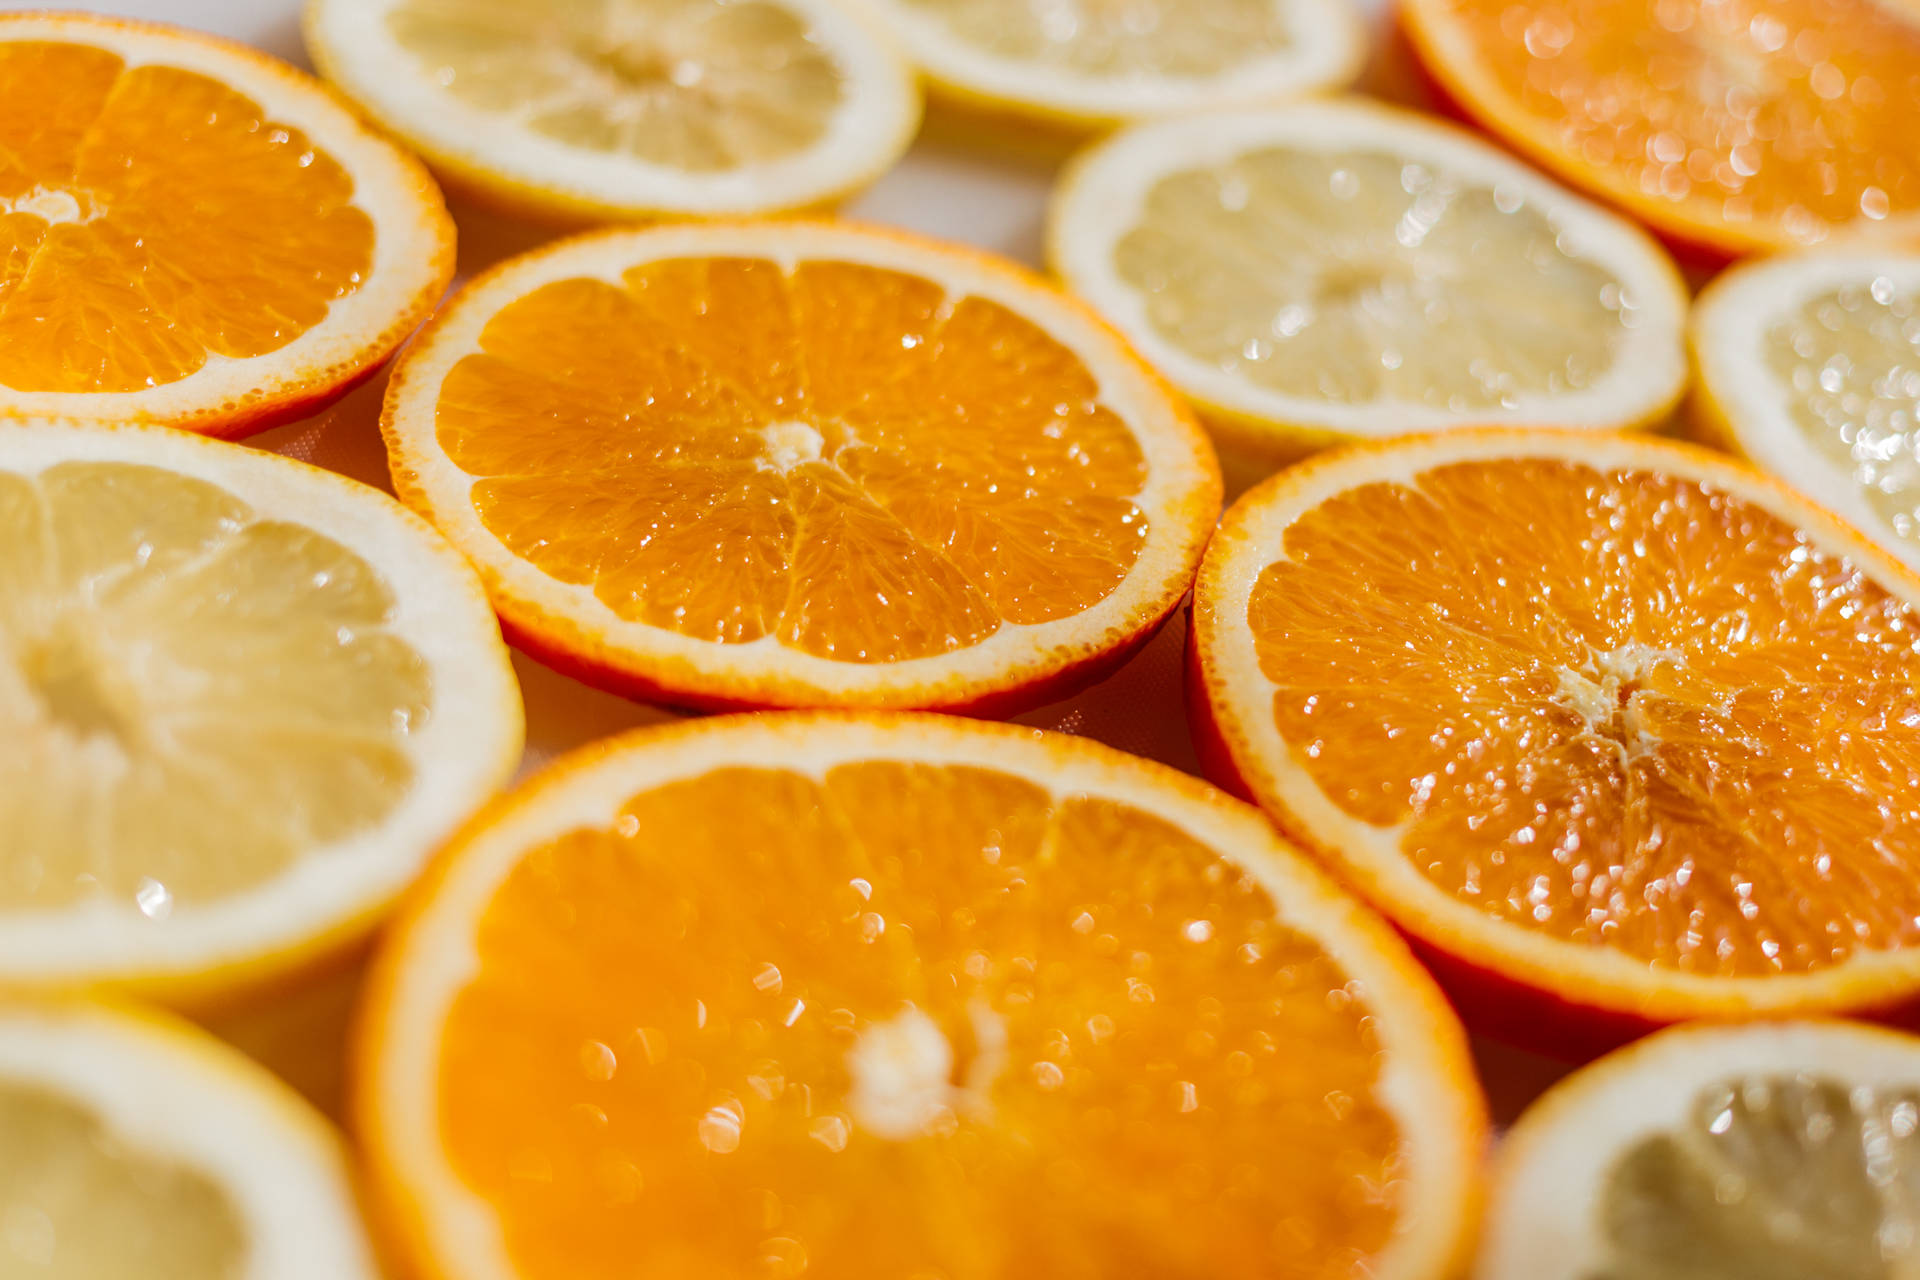 Enjoy the sweet and sour delight of orange and lemon slices! Wallpaper